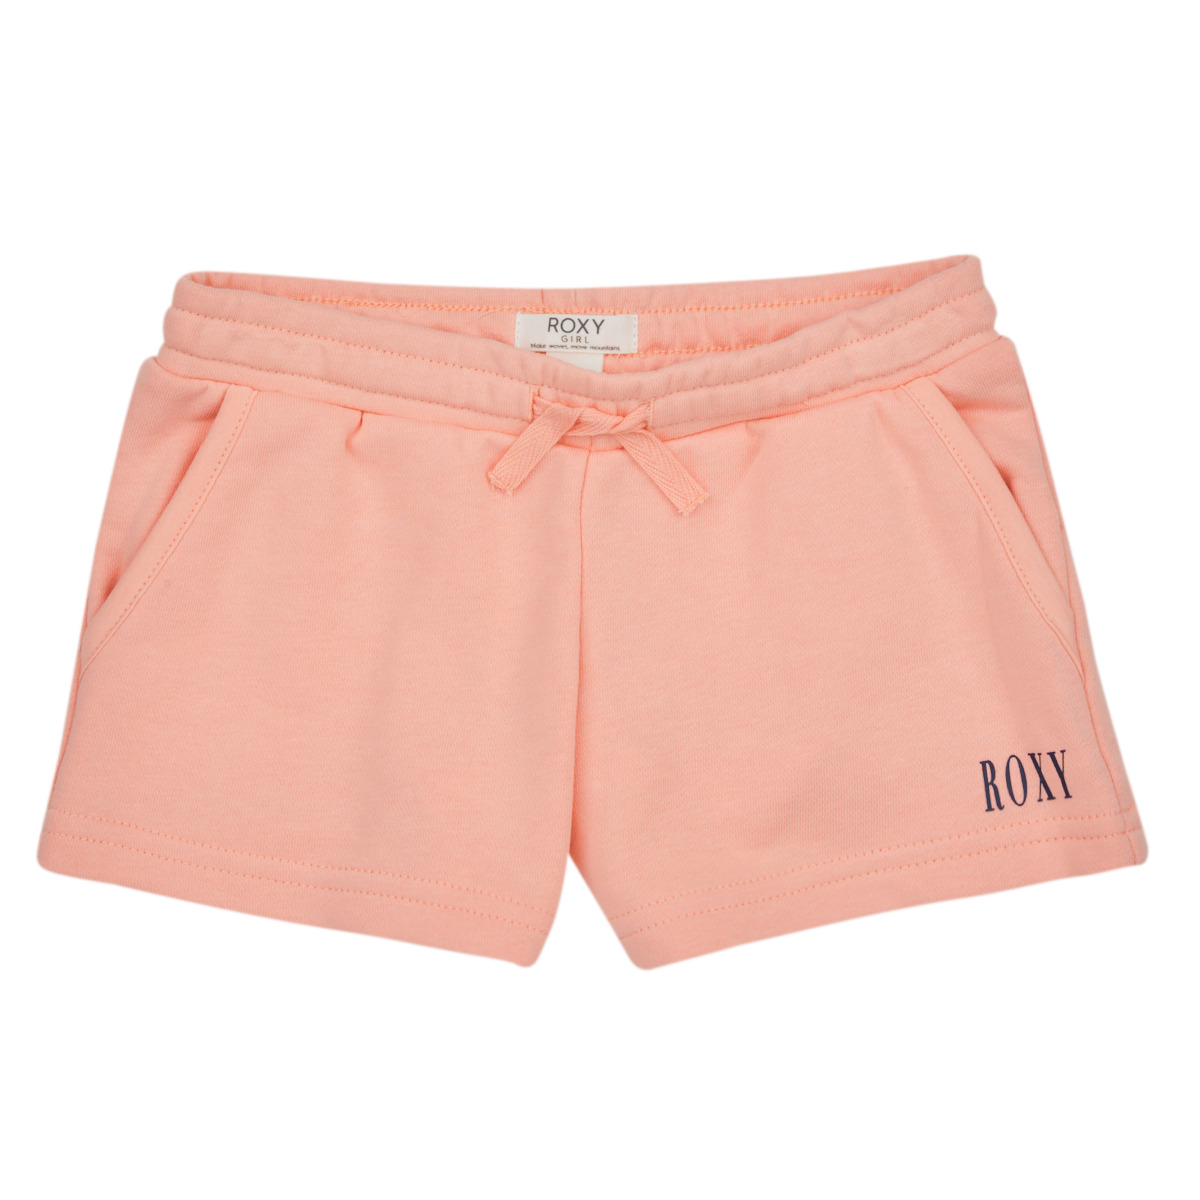 Child delivery / Spartoo - Bermudas Clothing Roxy ! Shorts - Pink HAPPINESS Free ORIGIN NET FOREVER SHORT |